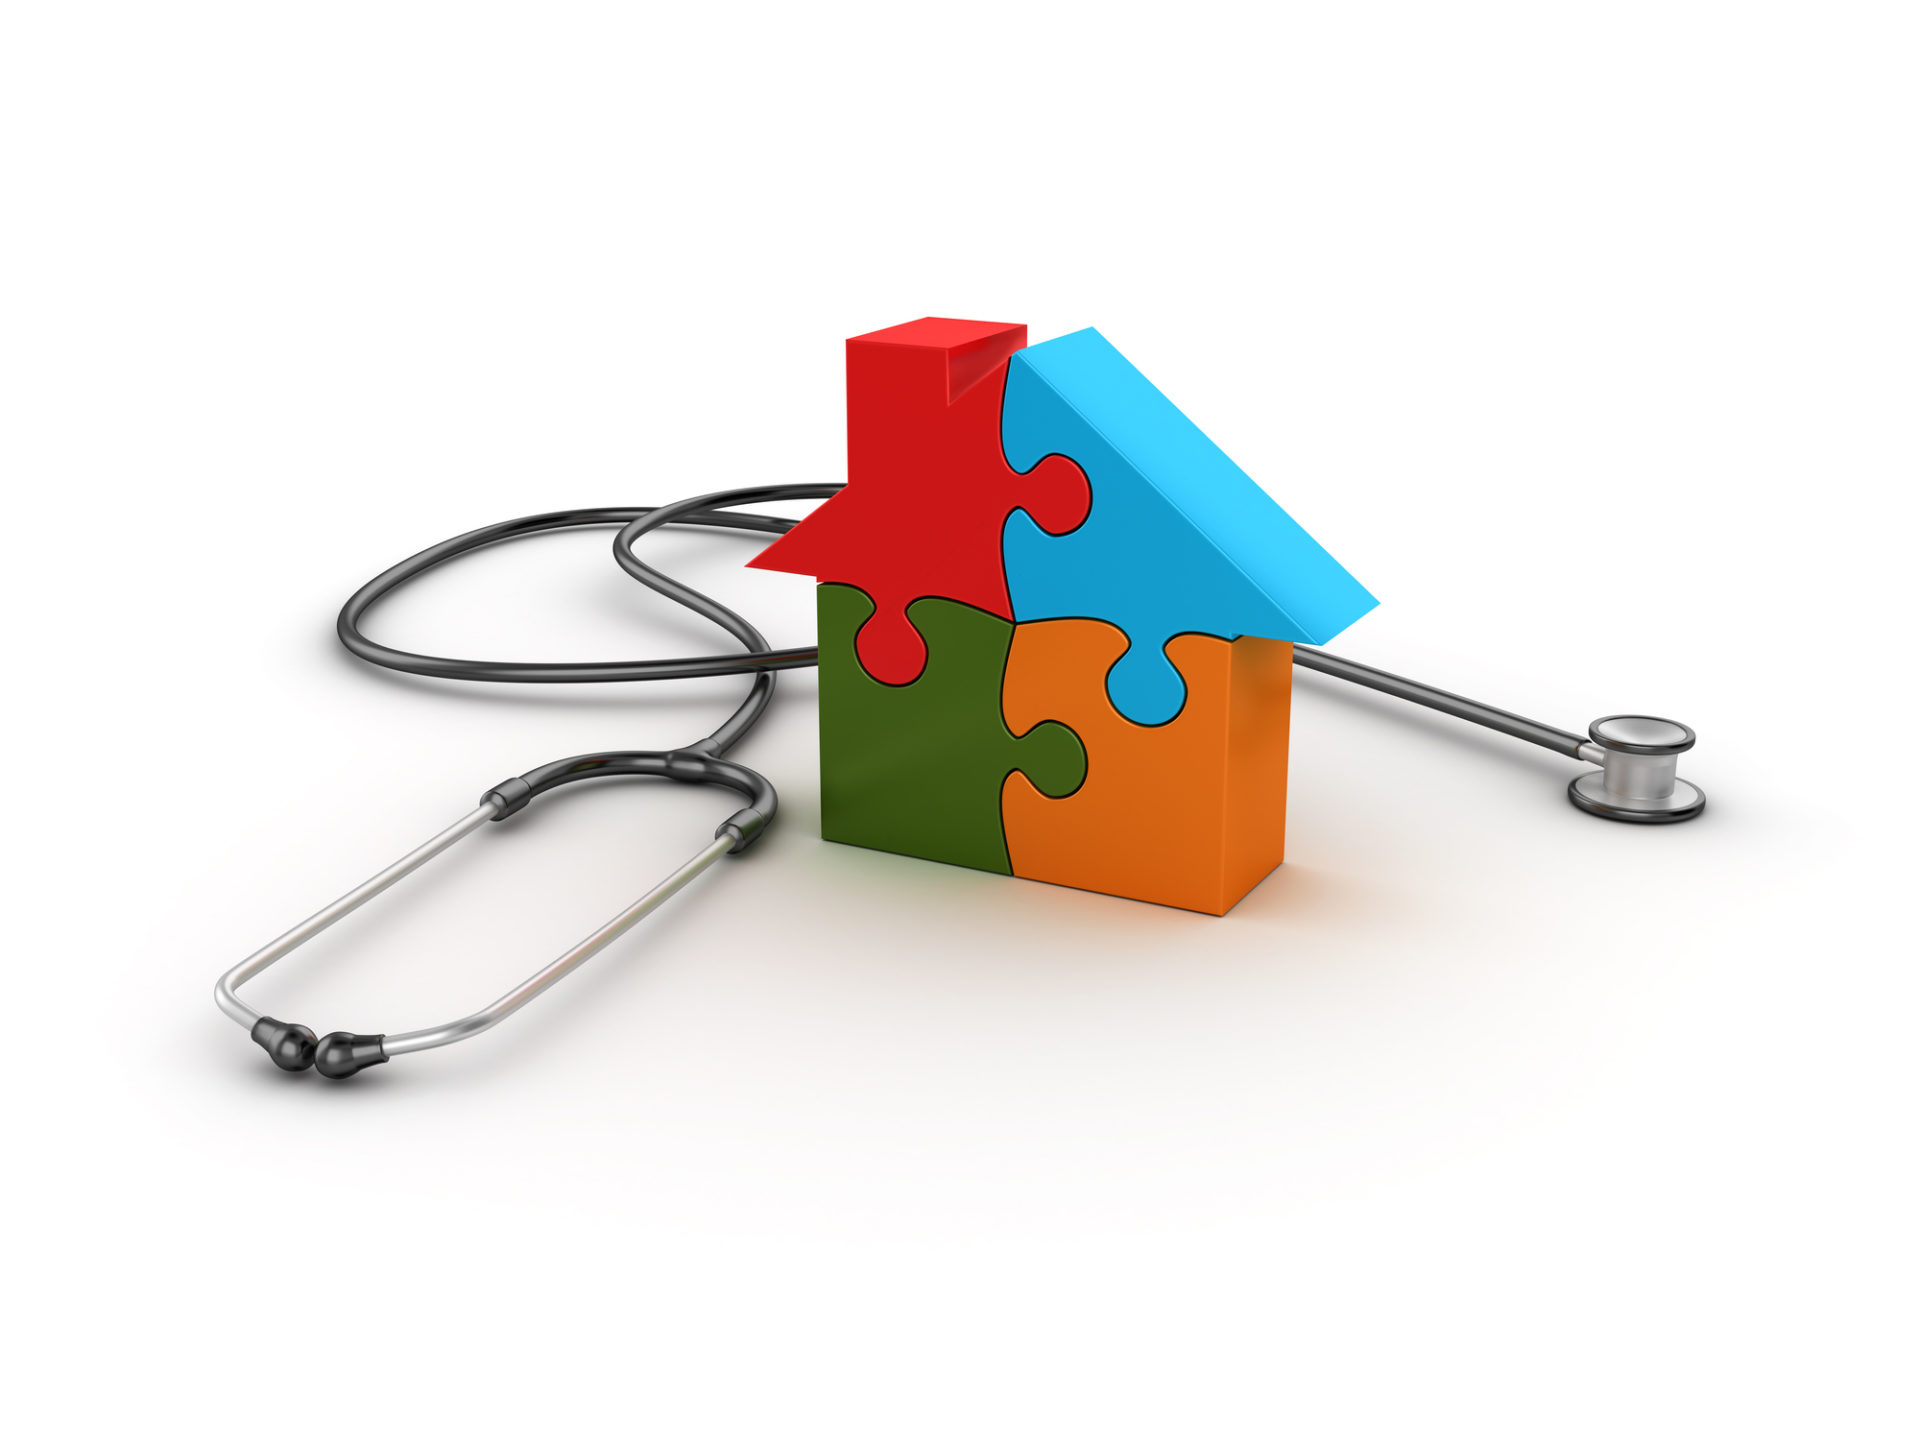 Stethoscope with Puzzle House - 3D Rendering